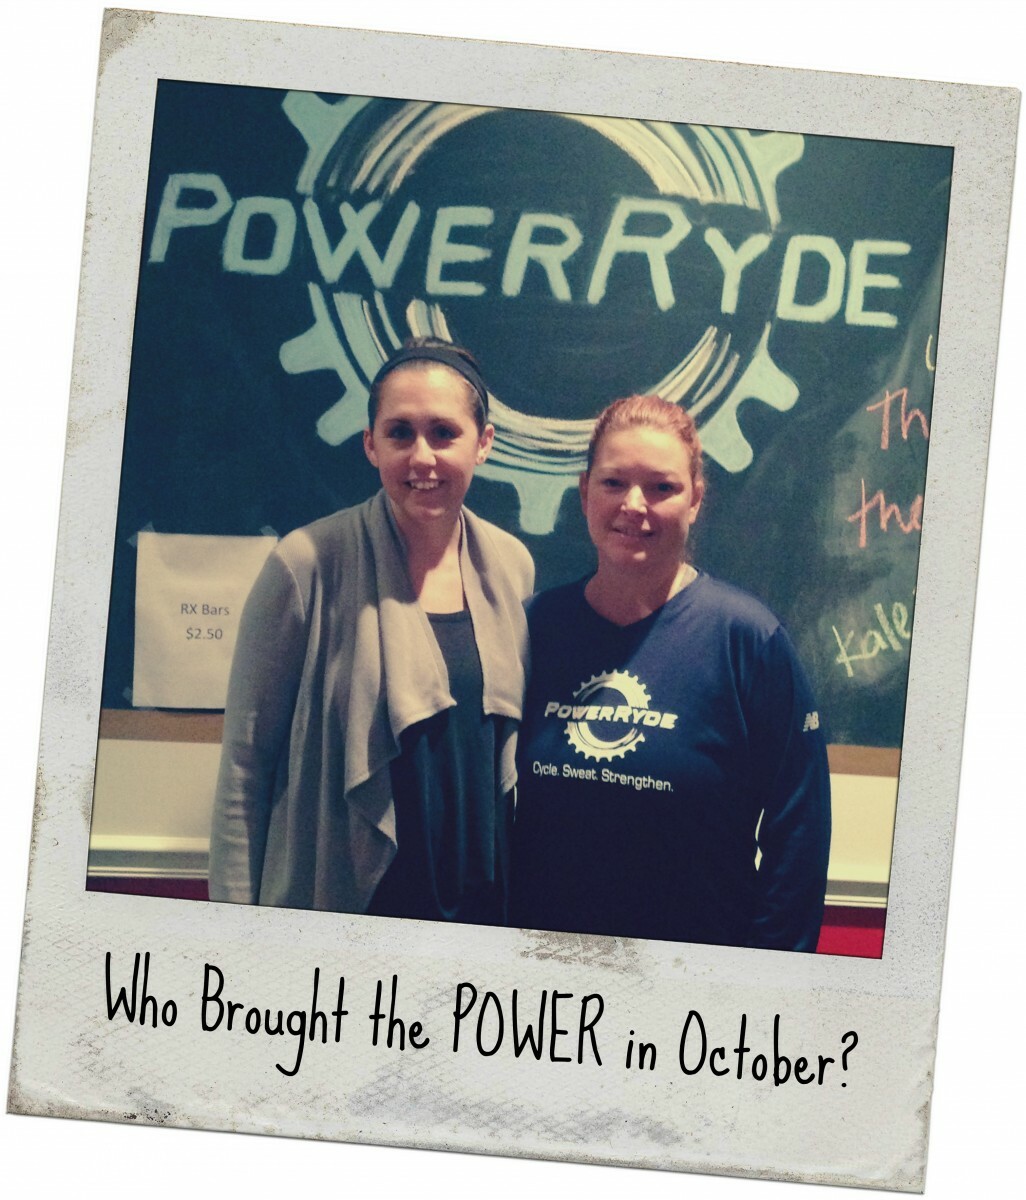 Polaroid style picture of Kelly and Lena Mondy with 'Who Brought the POWER in 'October'?